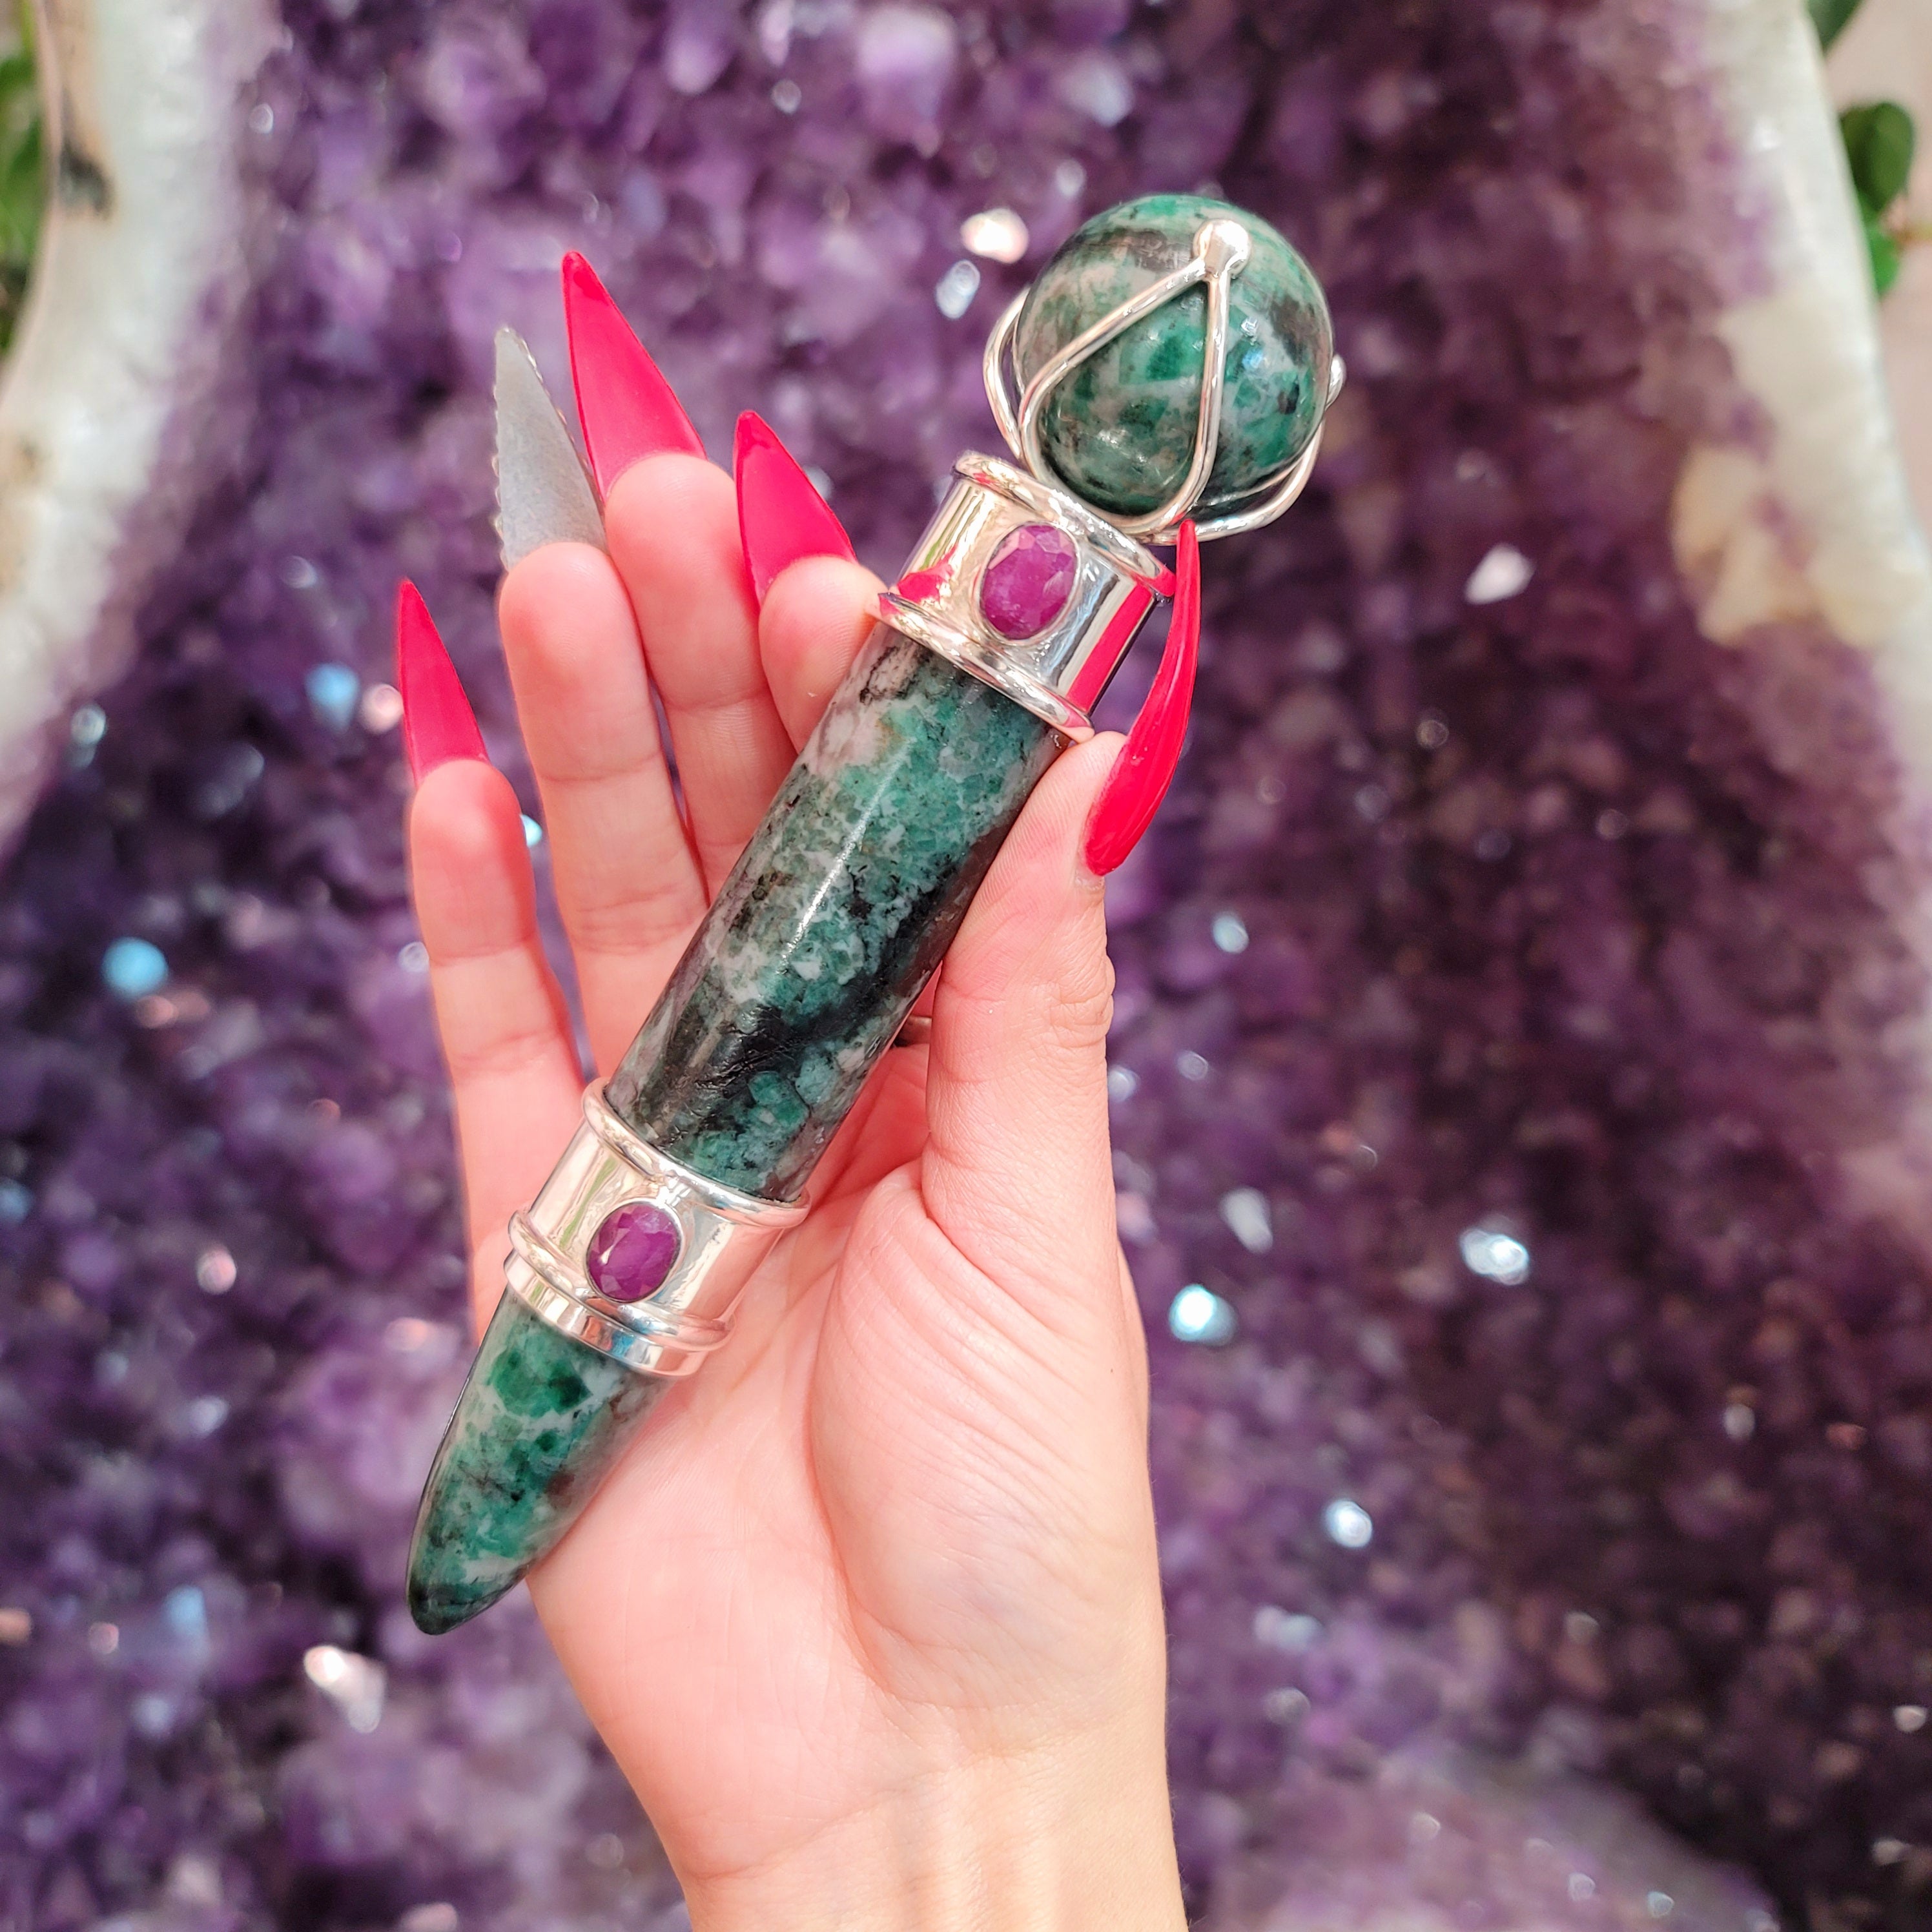 Emerald and Ruby Goddess Wand for Abundance, Love and Wealth